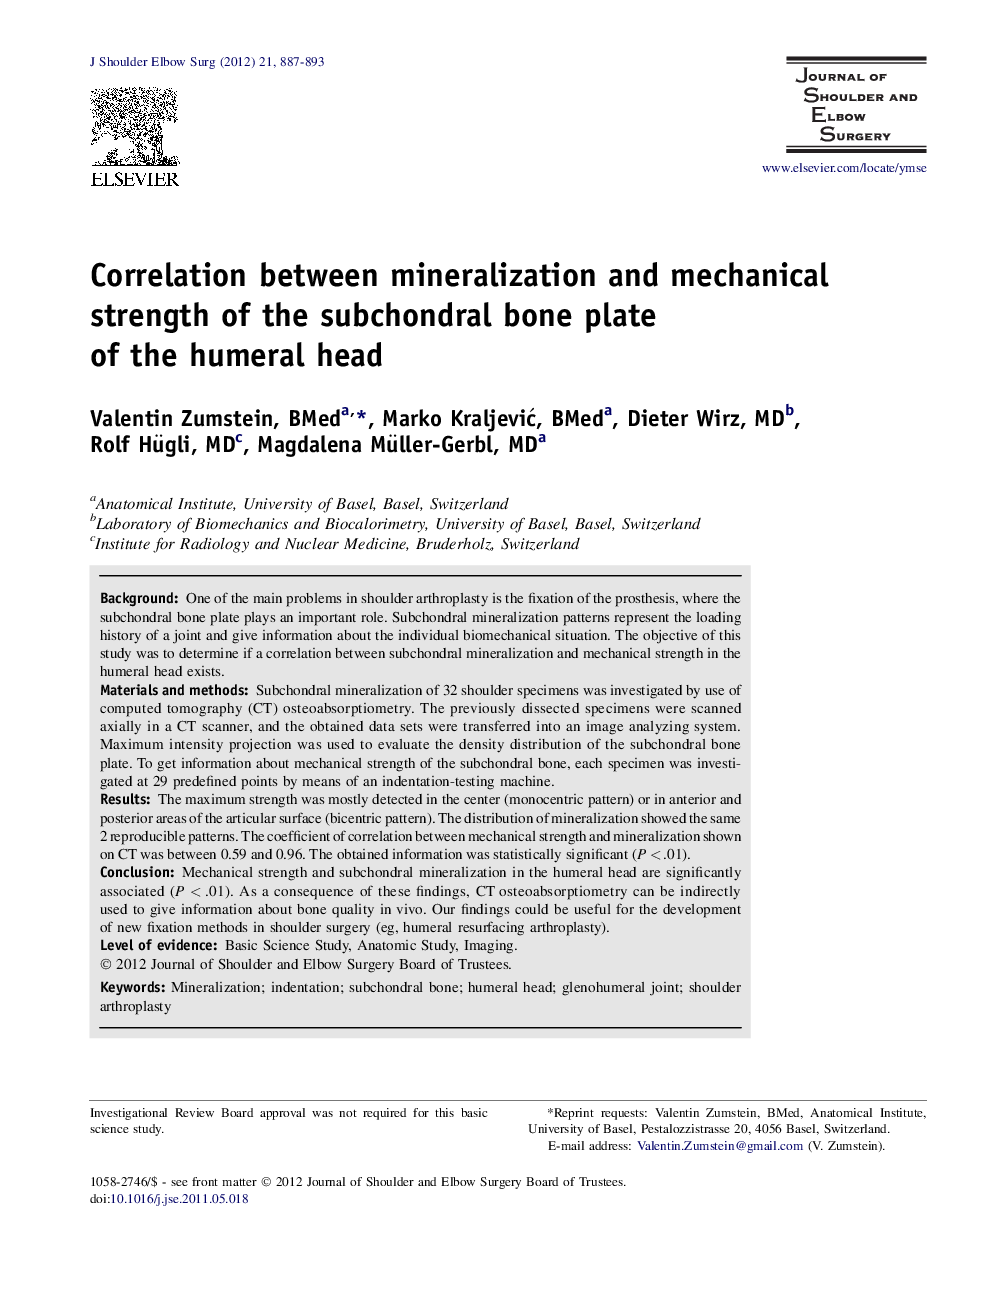 Correlation between mineralization and mechanical strength of the subchondral bone plate of the humeral head 